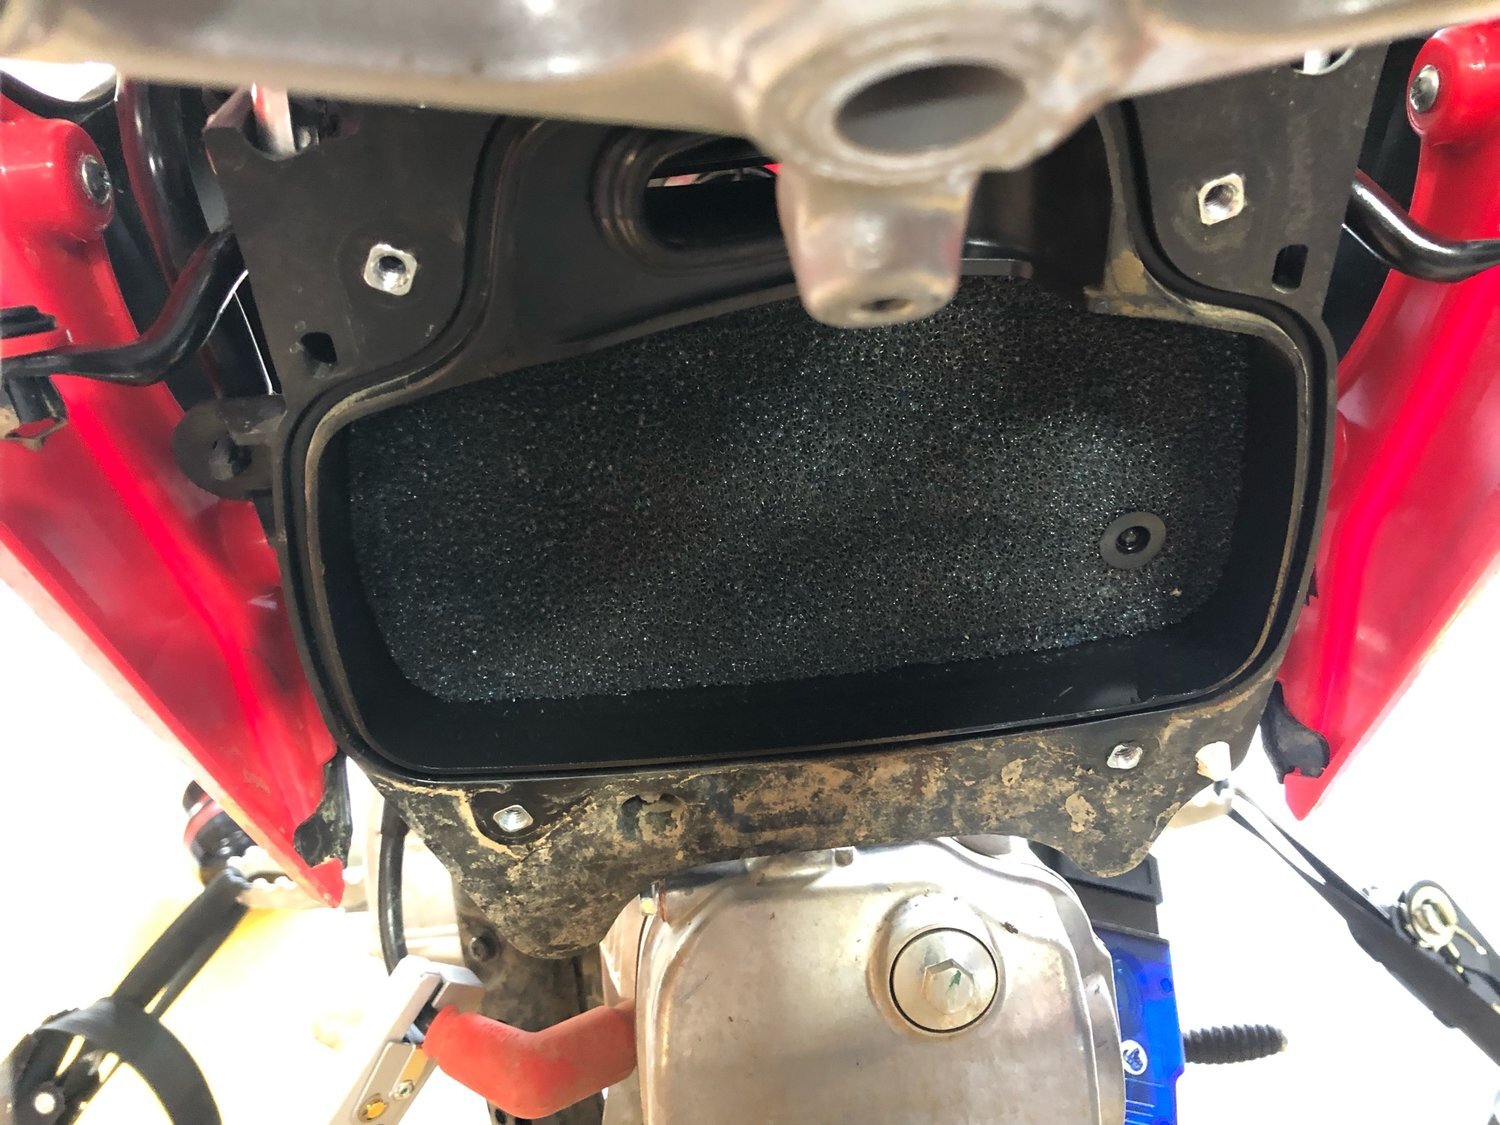 As we remove the airbox lid, we find a rather thick foam filter with a mesh backfire screen on the opposite side. We found the foam was a bit saturated from the factory. So we wringed out the excess oil and removed the backfire screen. From here, th…